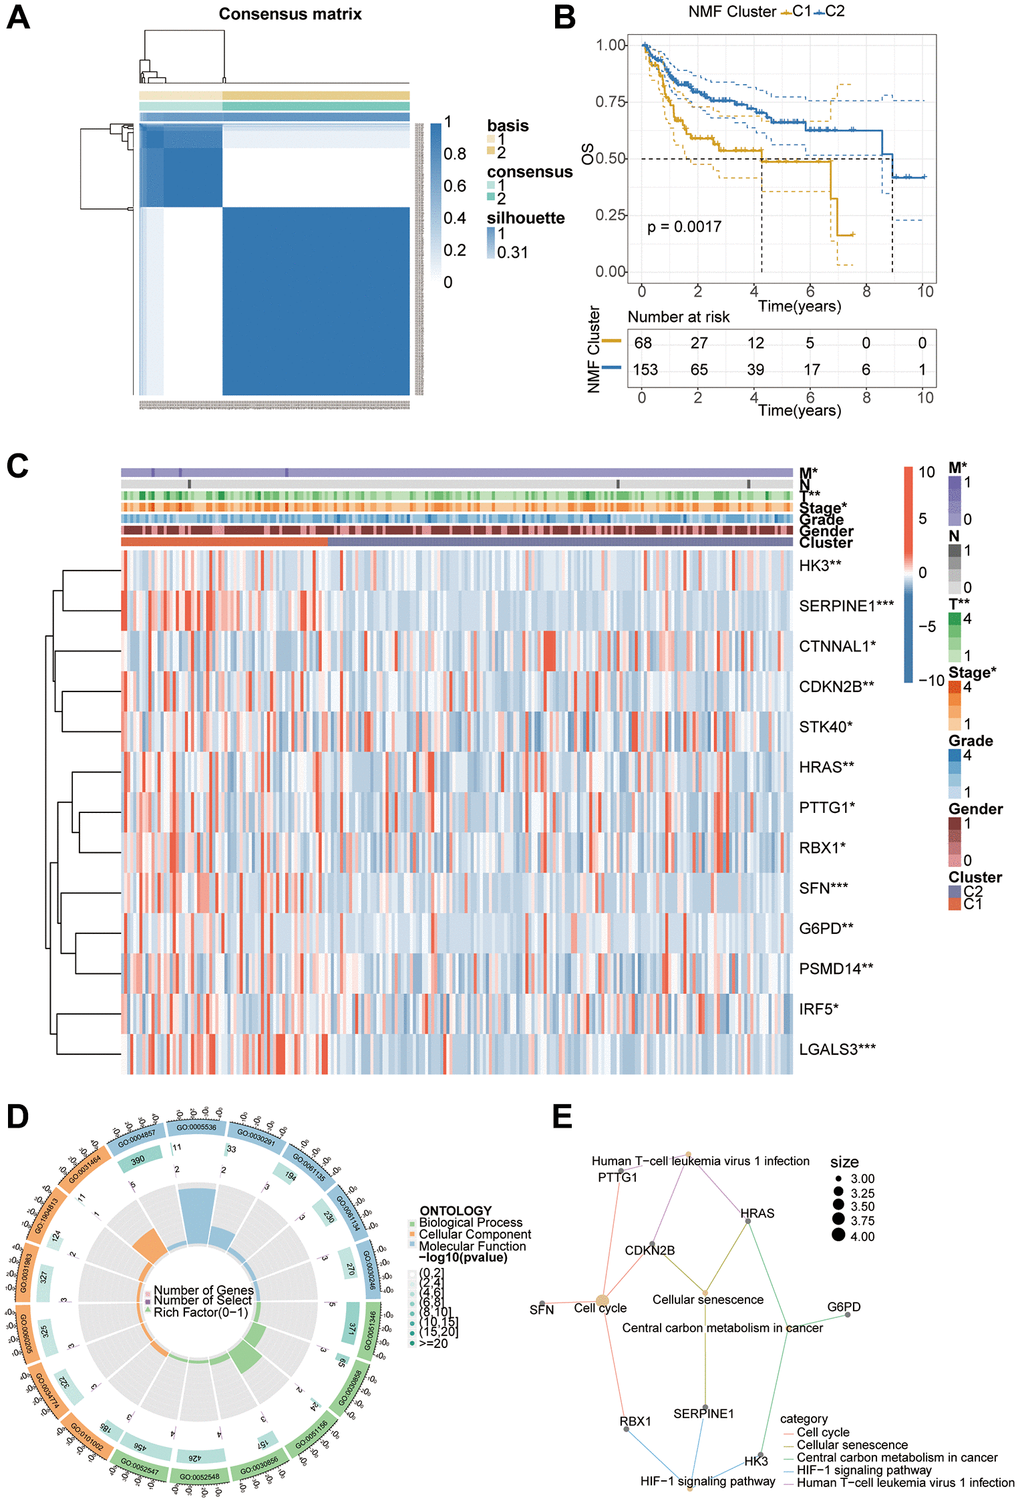 NMF staging and correlation analysis of patients with hepatocellular carcinoma. (A) Patients were classified into two clusters using the NMF algorithm. (B) Prognostic analysis revealed a poorer prognosis for patients with the C1 cluster. (C) Exploration of differential genes between different subtypes by differential analysis. (D, E) GO and KEGG analysis to investigate the underlying mechanisms and pathways.